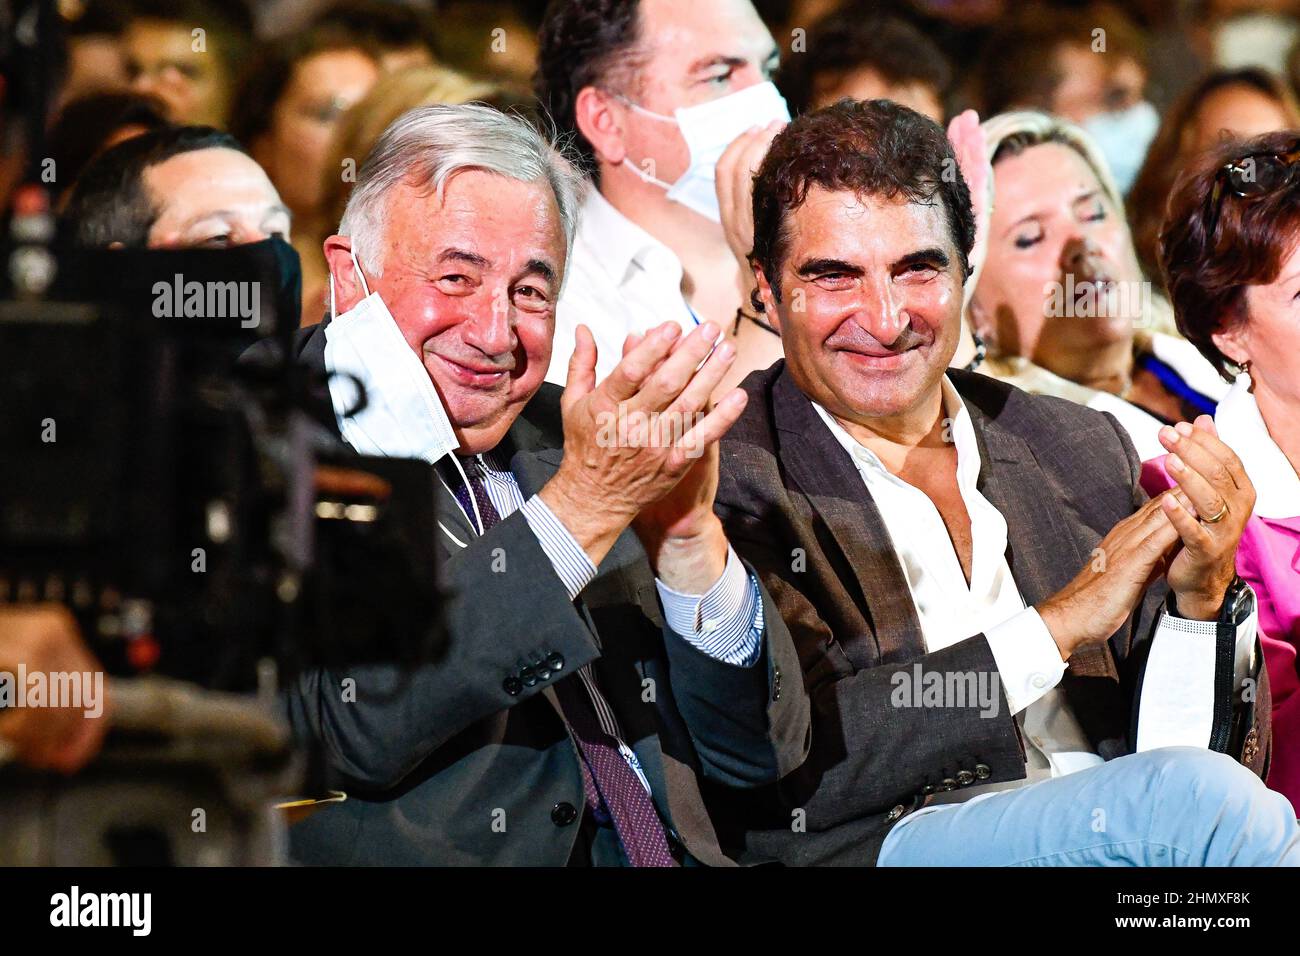 Christian Jacob, president of the French right-wing party Les Republicains (LR) with president of the French senate Gerard Larcher during the annual ' Stock Photo